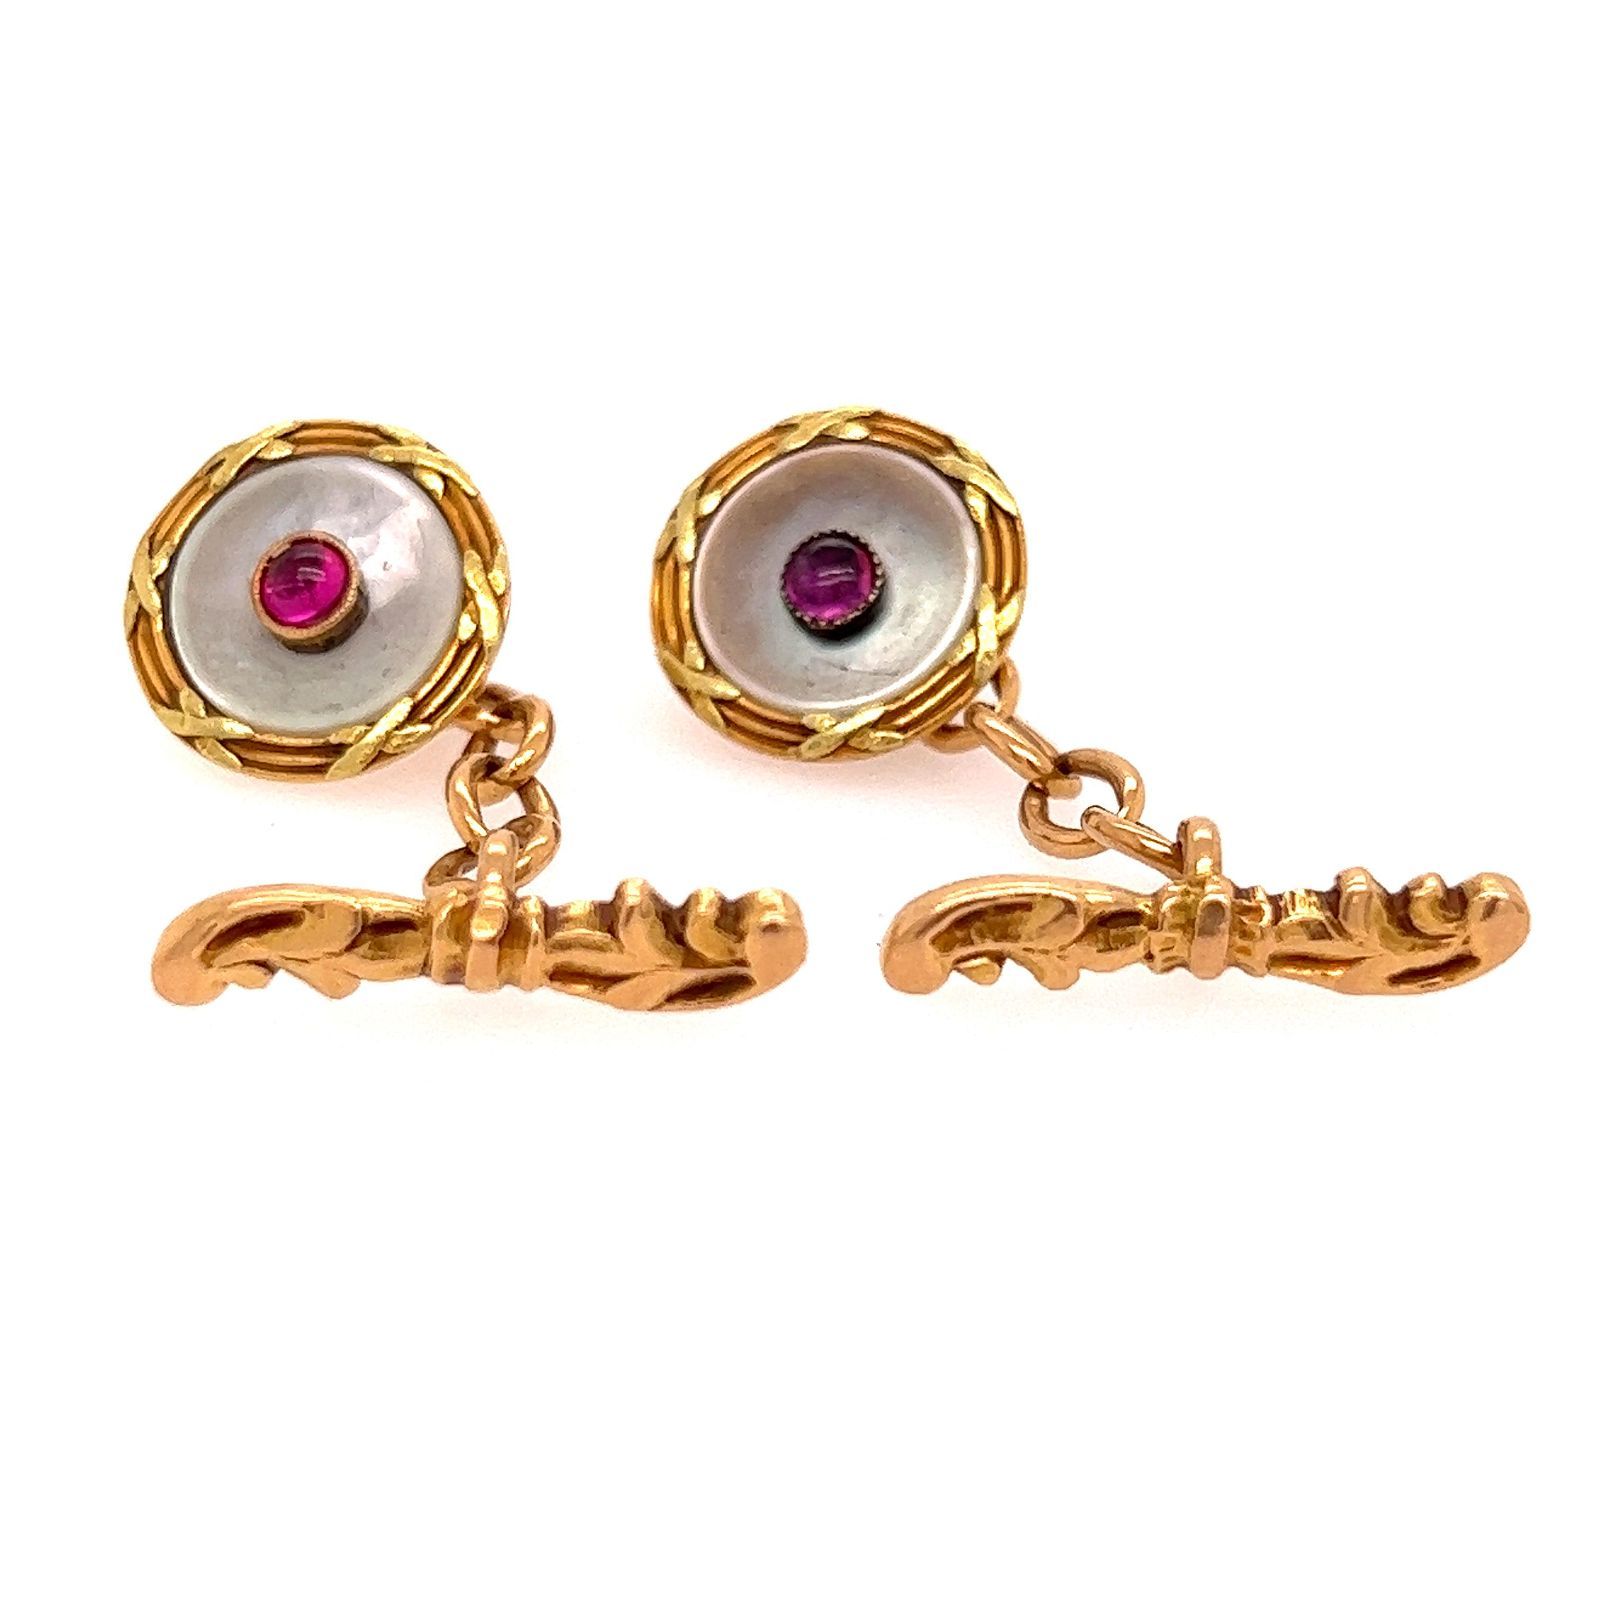 1920’s 18k Mabe Ruby Cufflinks 1920’s 18k Yellow Gold Weight 6.92g Mabe Ruby Cuf&hellip;